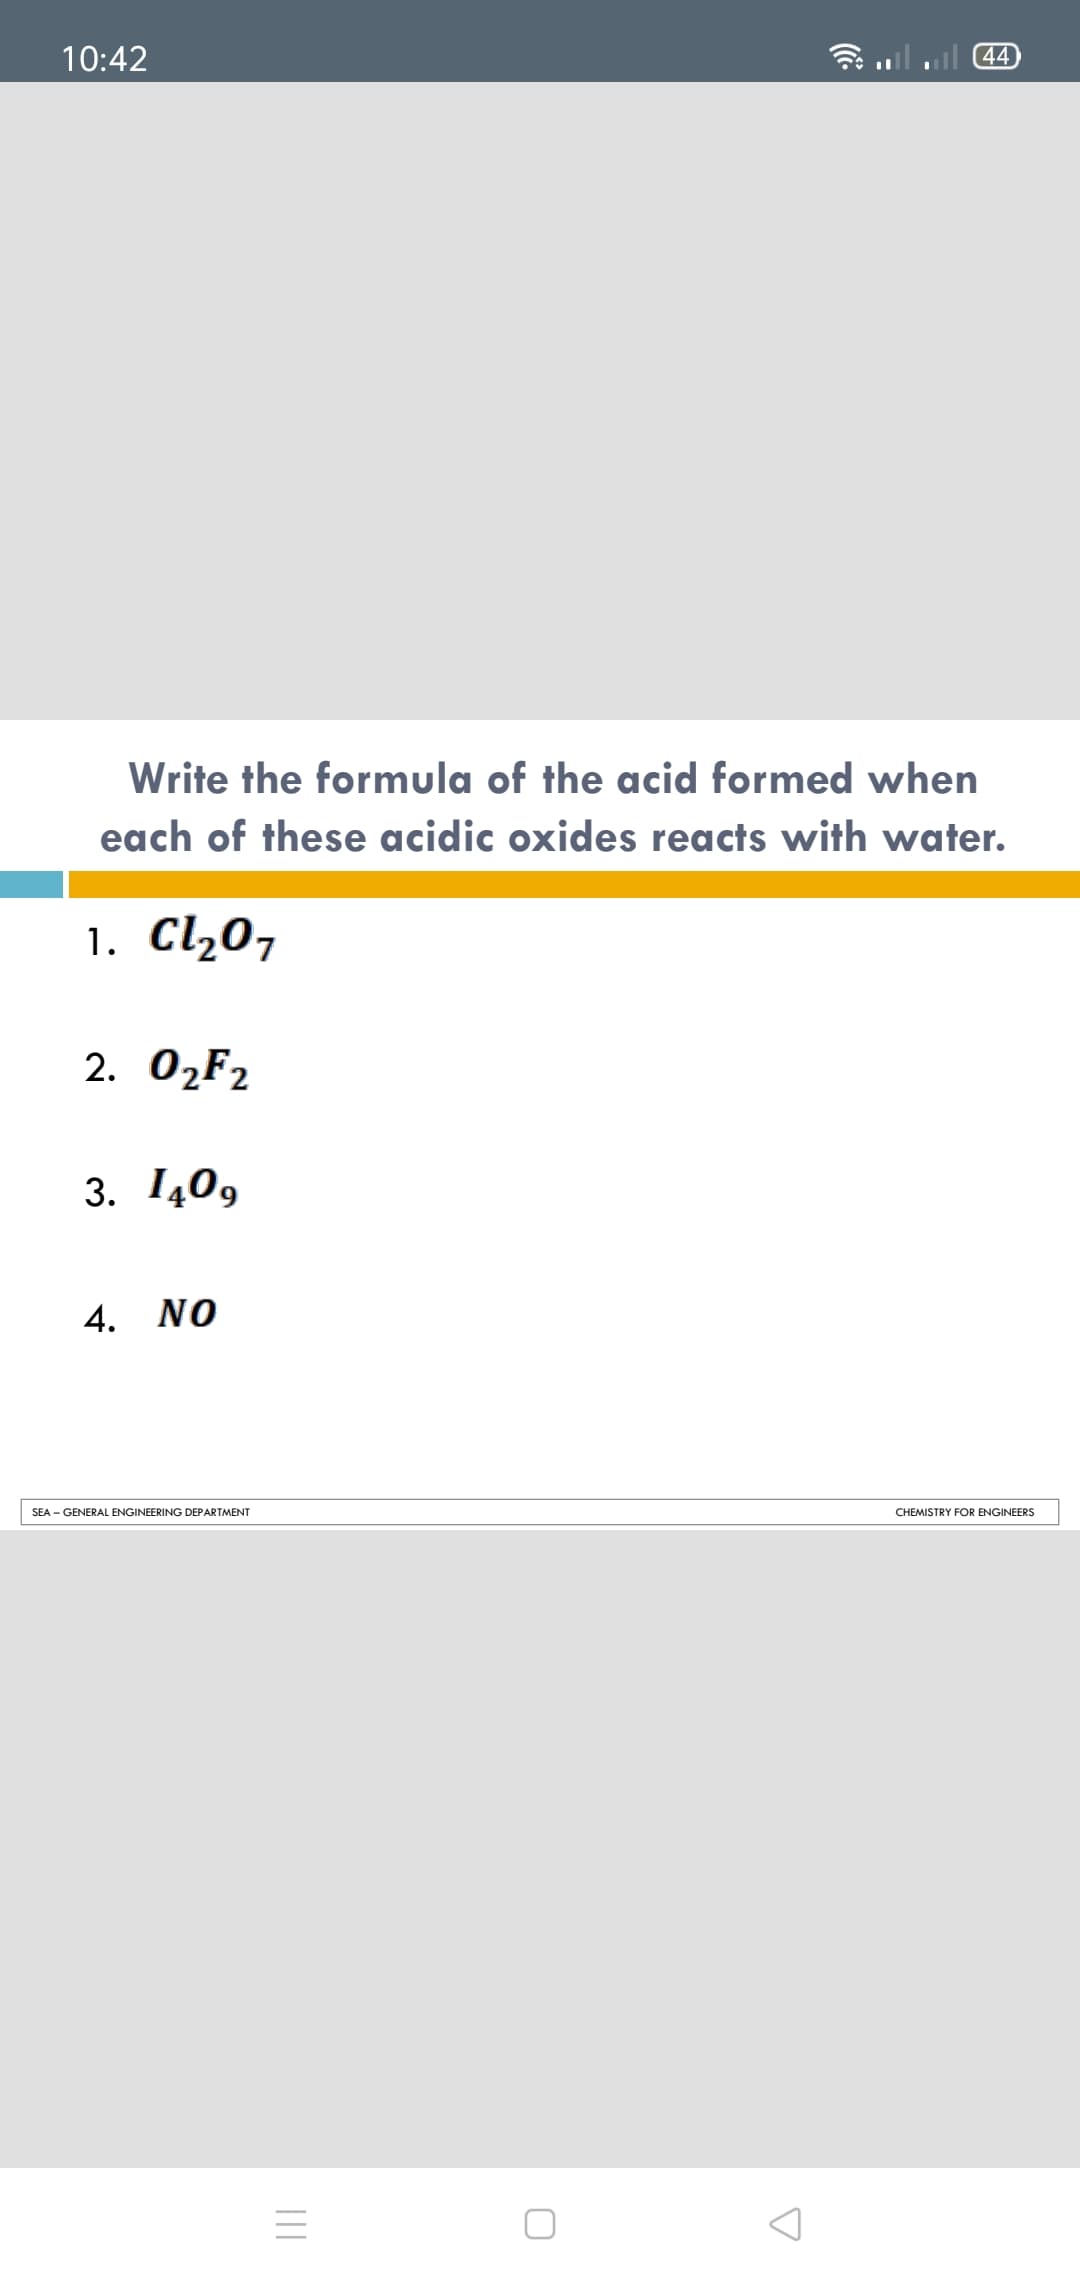 10:42
44
Write the formula of the acid formed when
each of these acidic oxides reacts with water.
1. Cl207
2. ОzFz
3. 140,
4. NO
SEA - GENERAL ENGINEERING DEPARTMENT
CHEMISTRY FOR ENGINEERS
